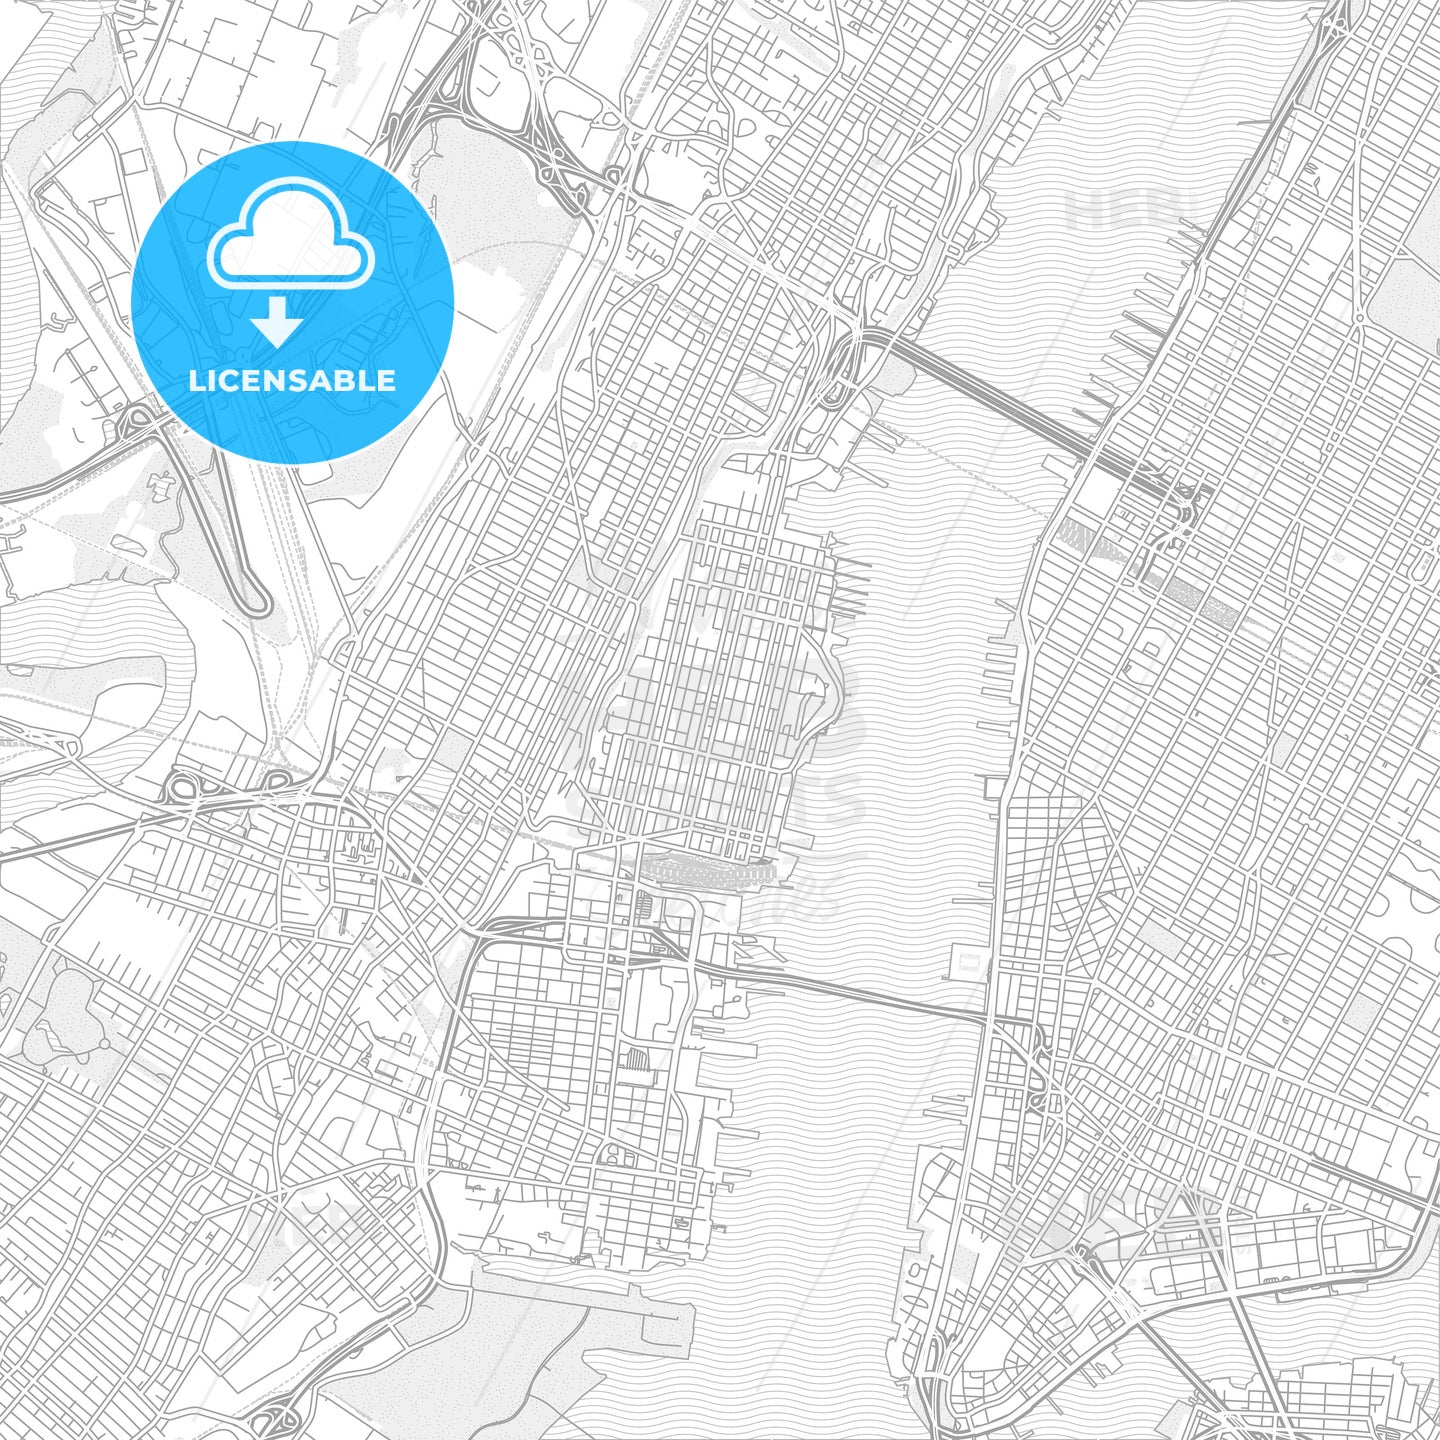 Hoboken, New Jersey, USA, bright outlined vector map